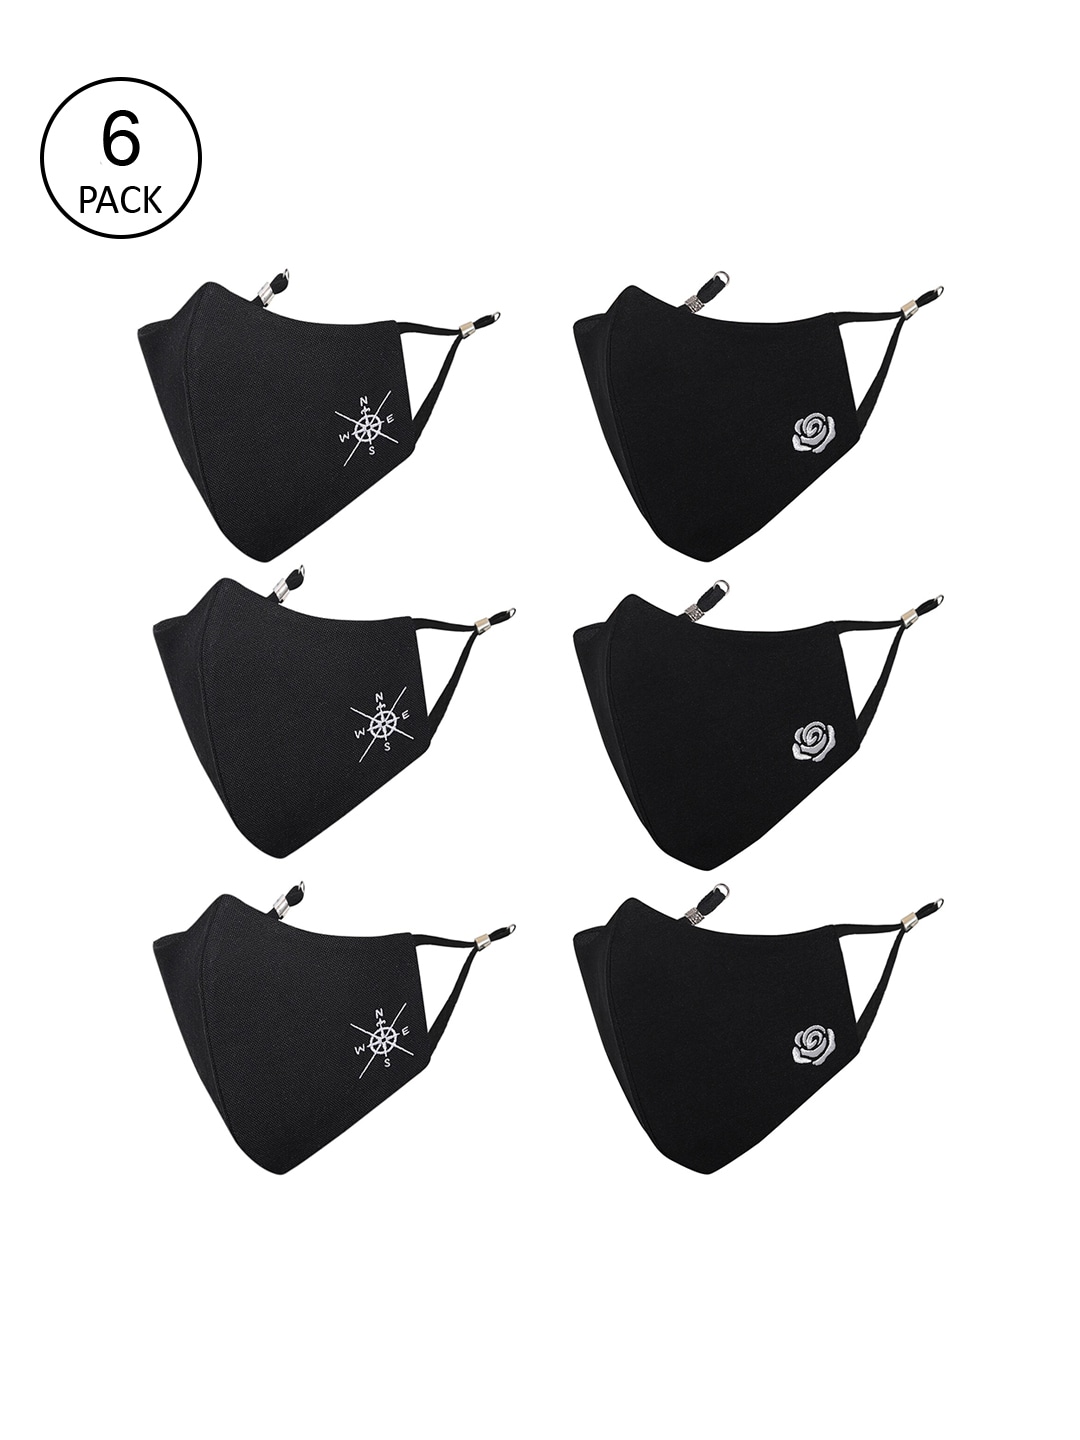 MASQ Pack Of 6 Black 4-Ply Reusable Pure Cotton Cloth Face Masks Price in India